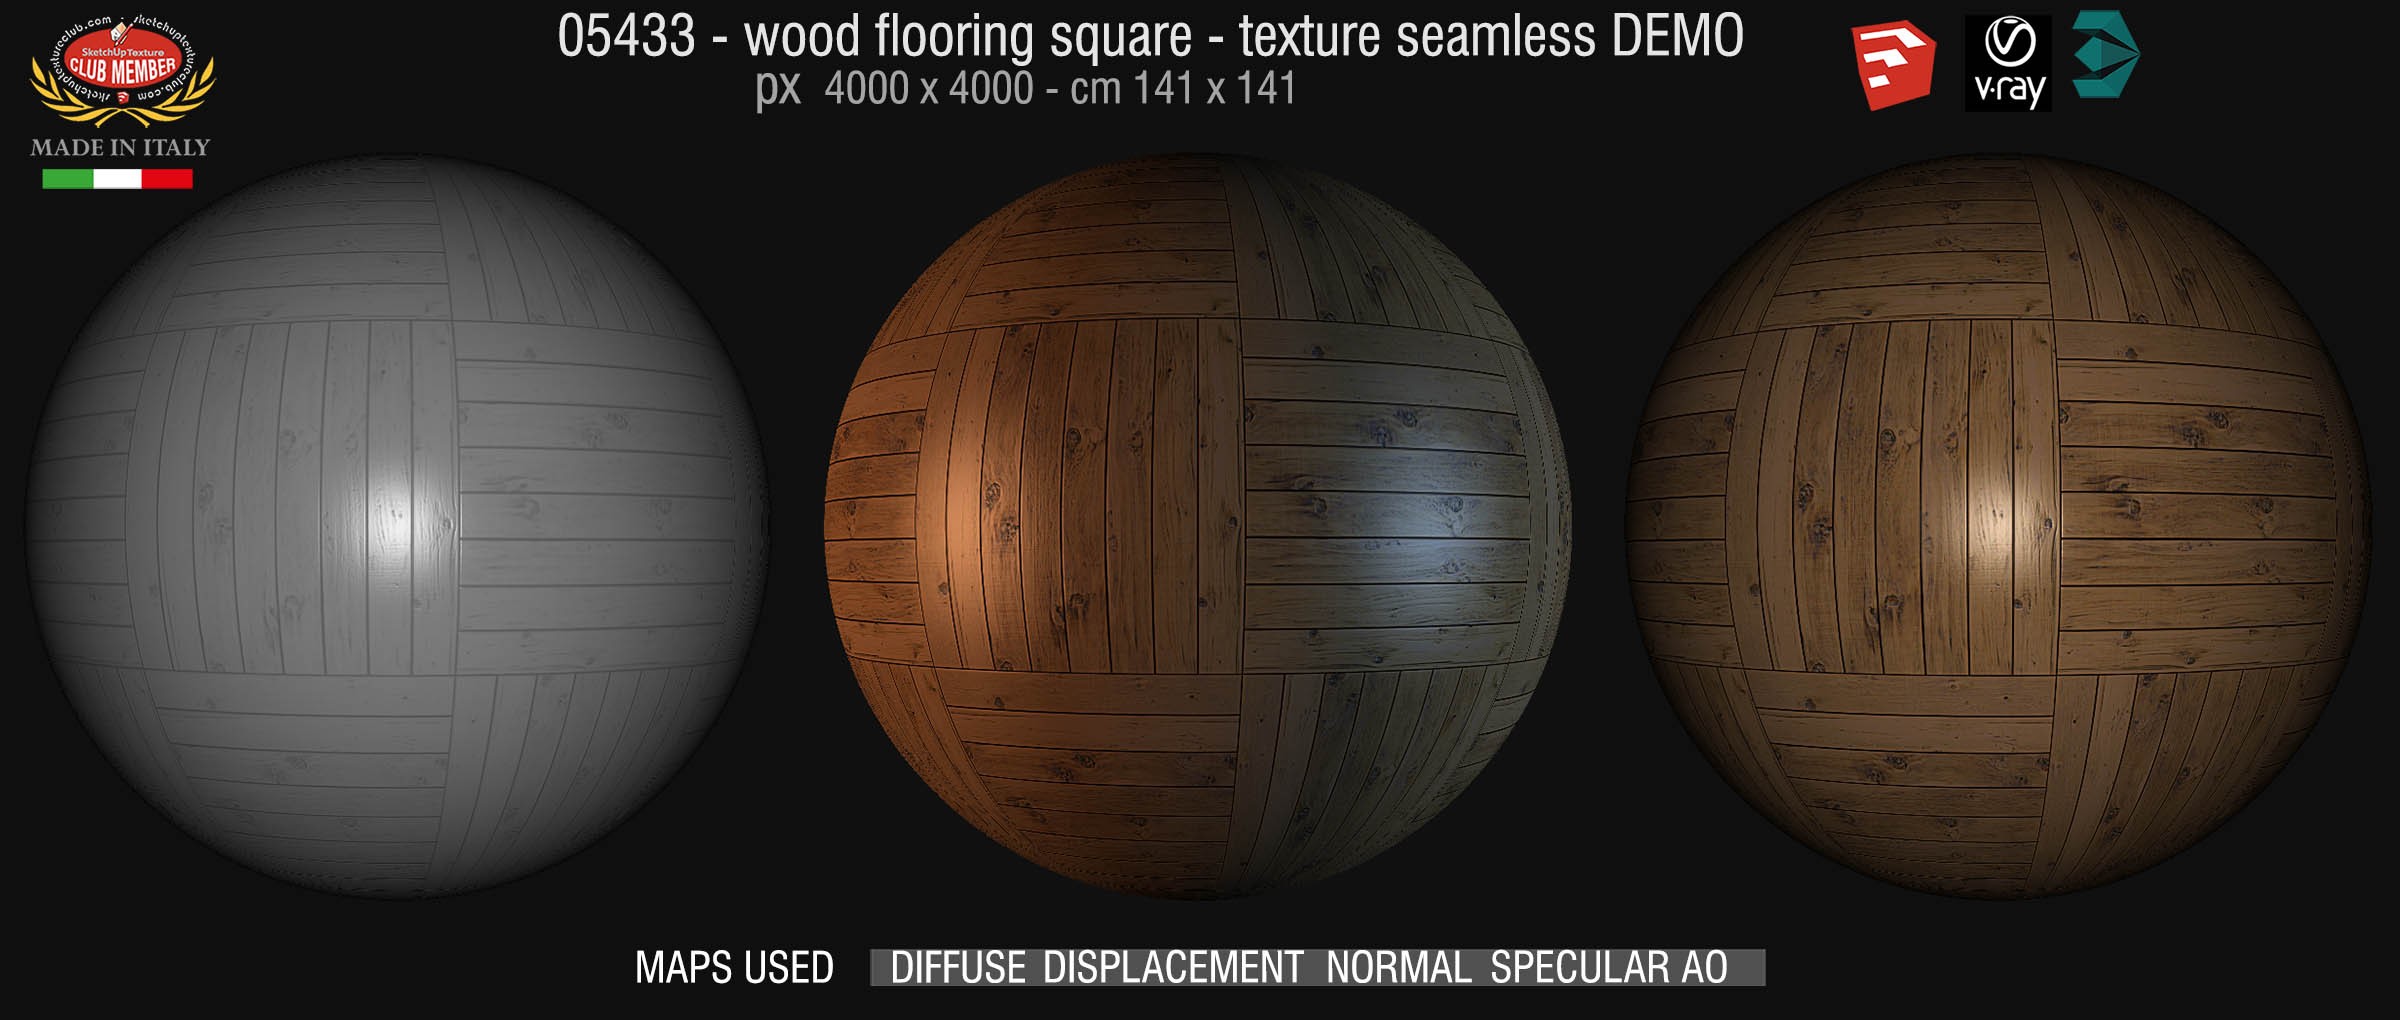 05433 Wood flooring square texture seamless + maps DEMO